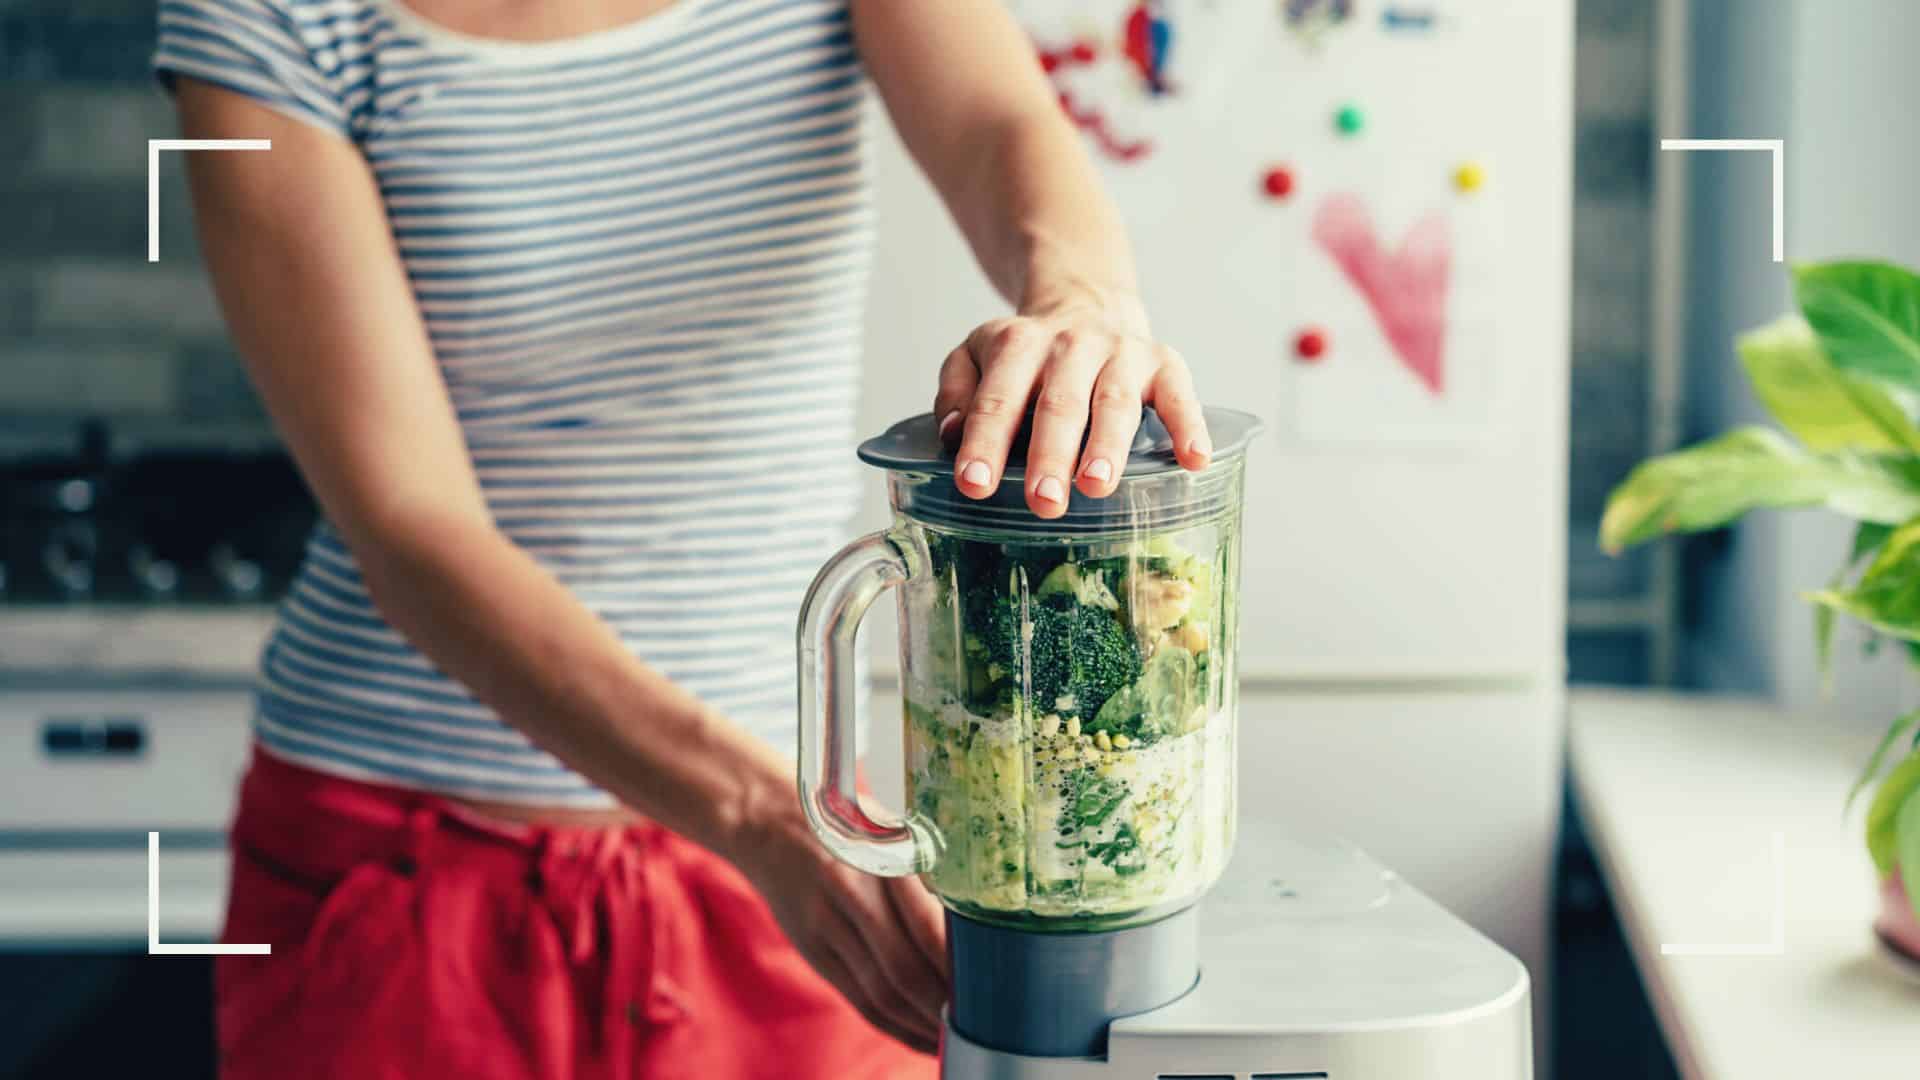 How To Use A Food Processor